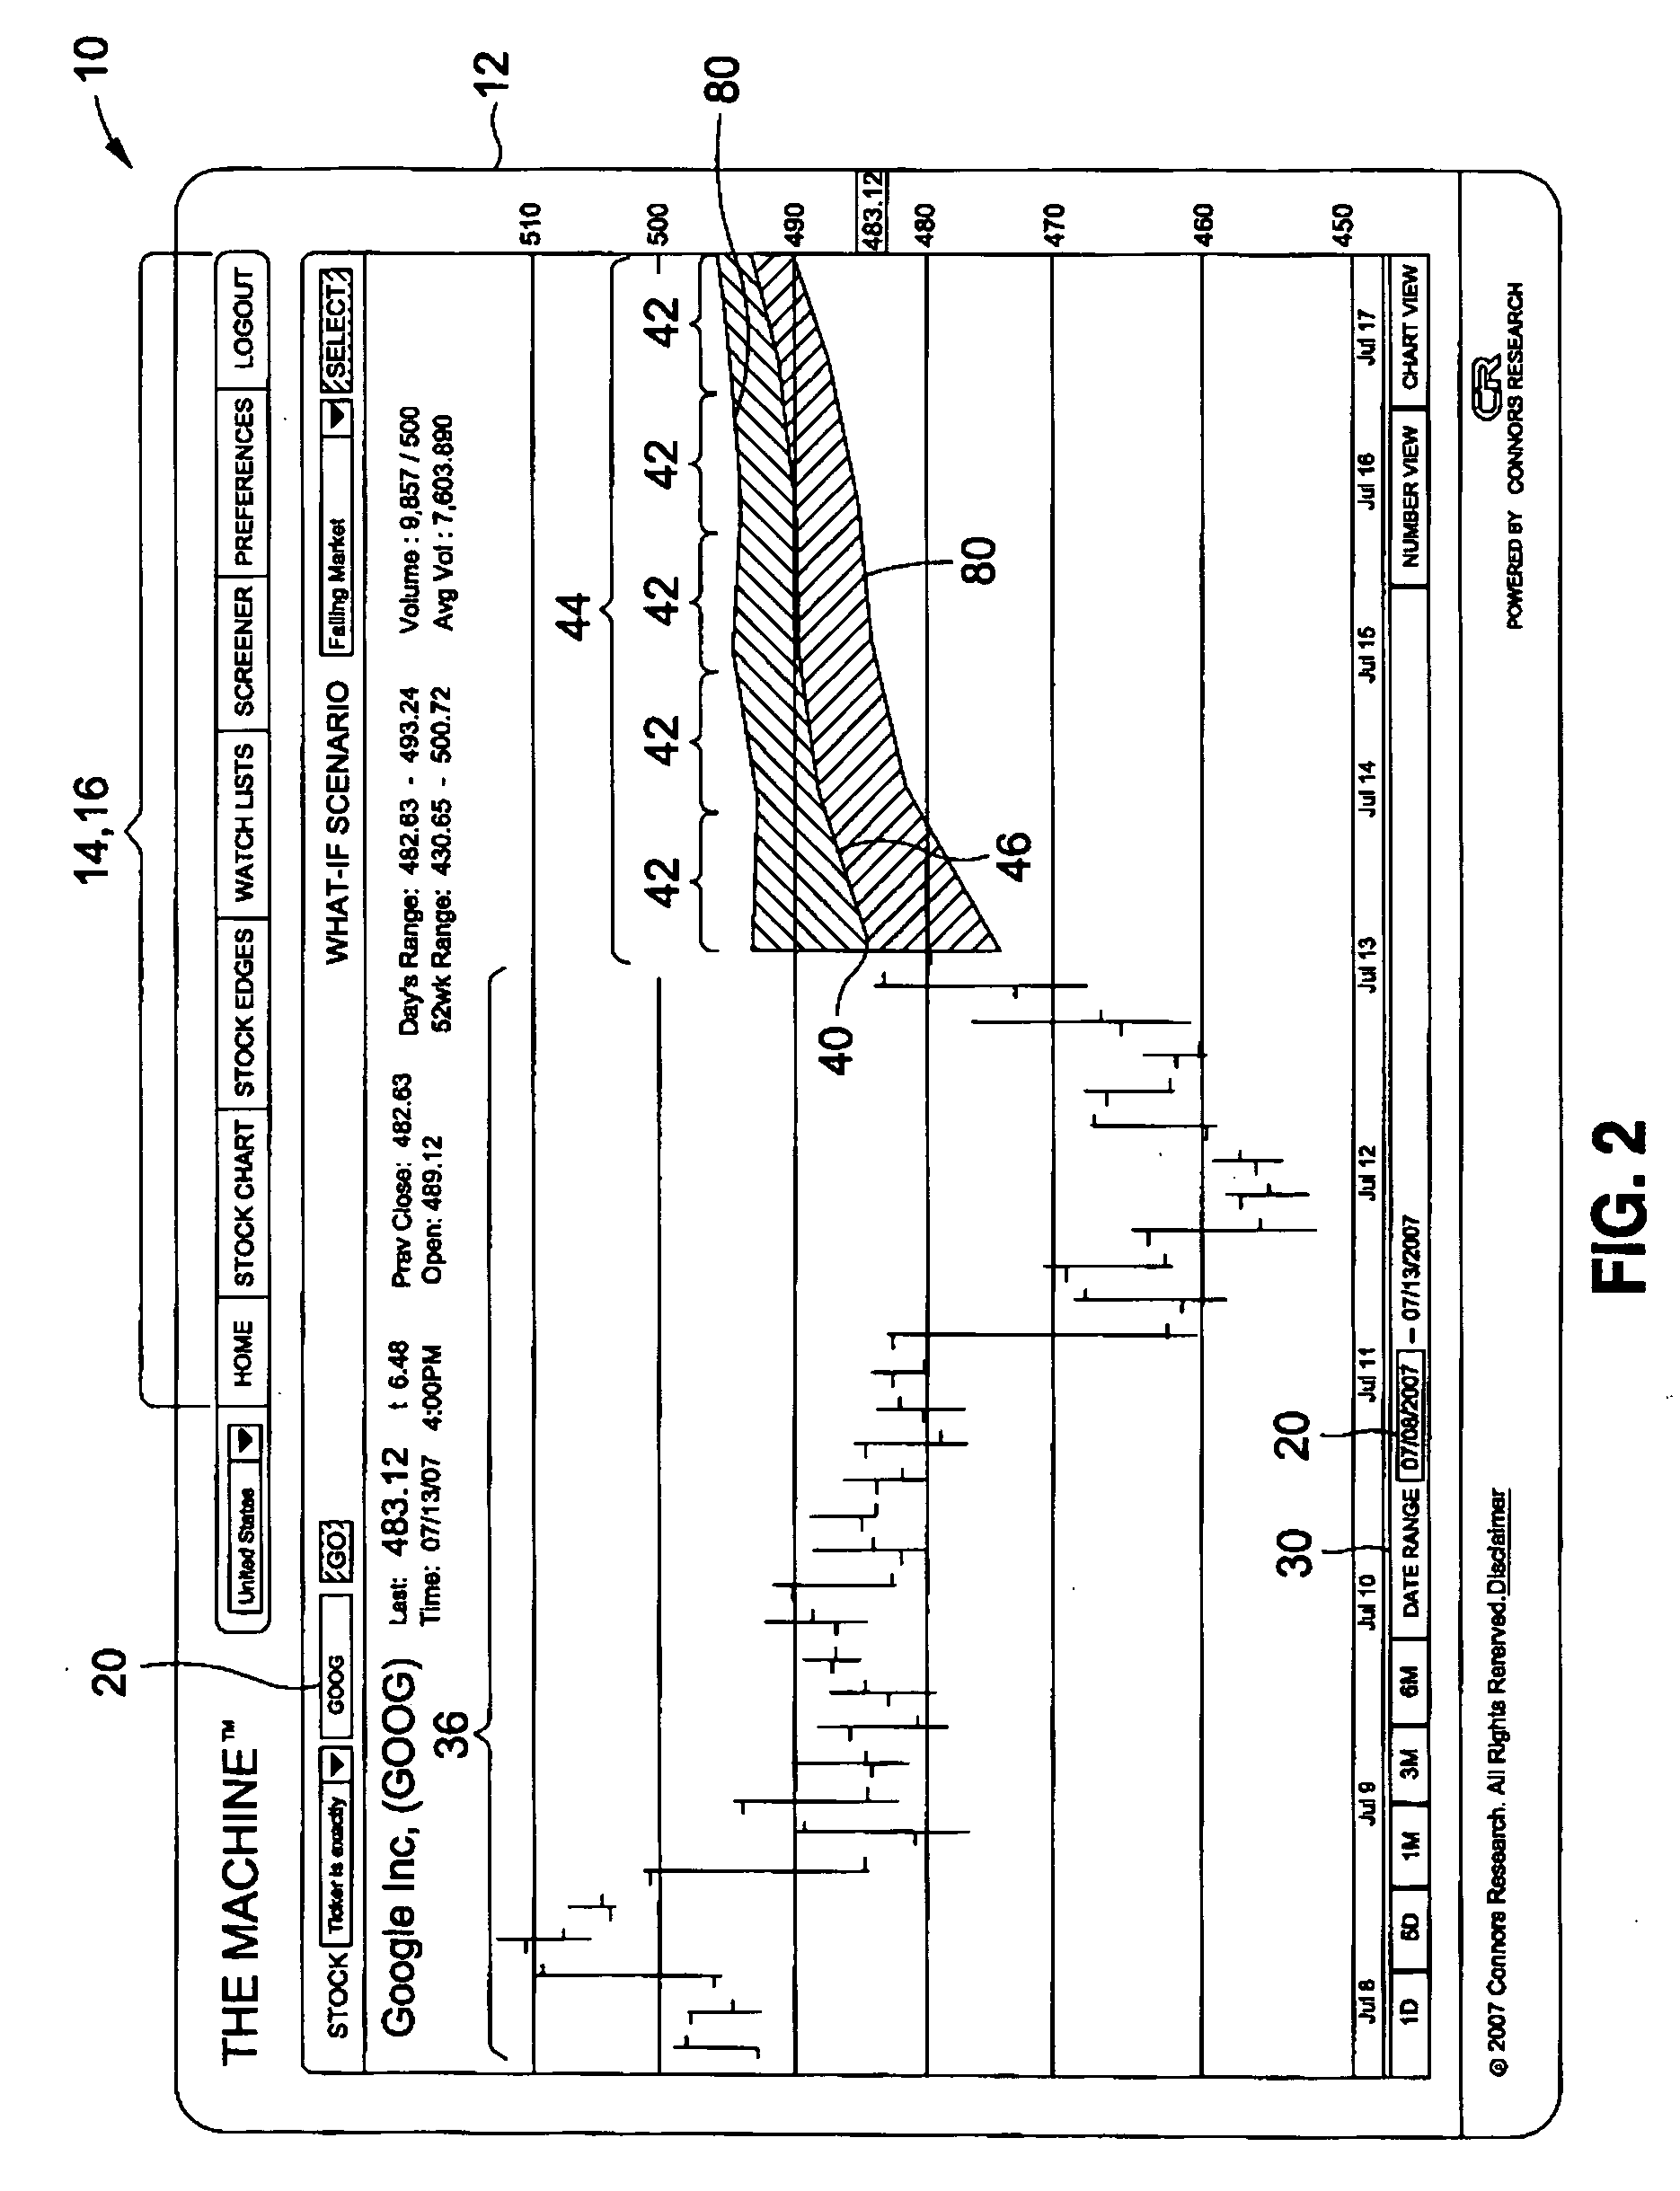 Method of presenting predictive data including standard deviation of financial securities